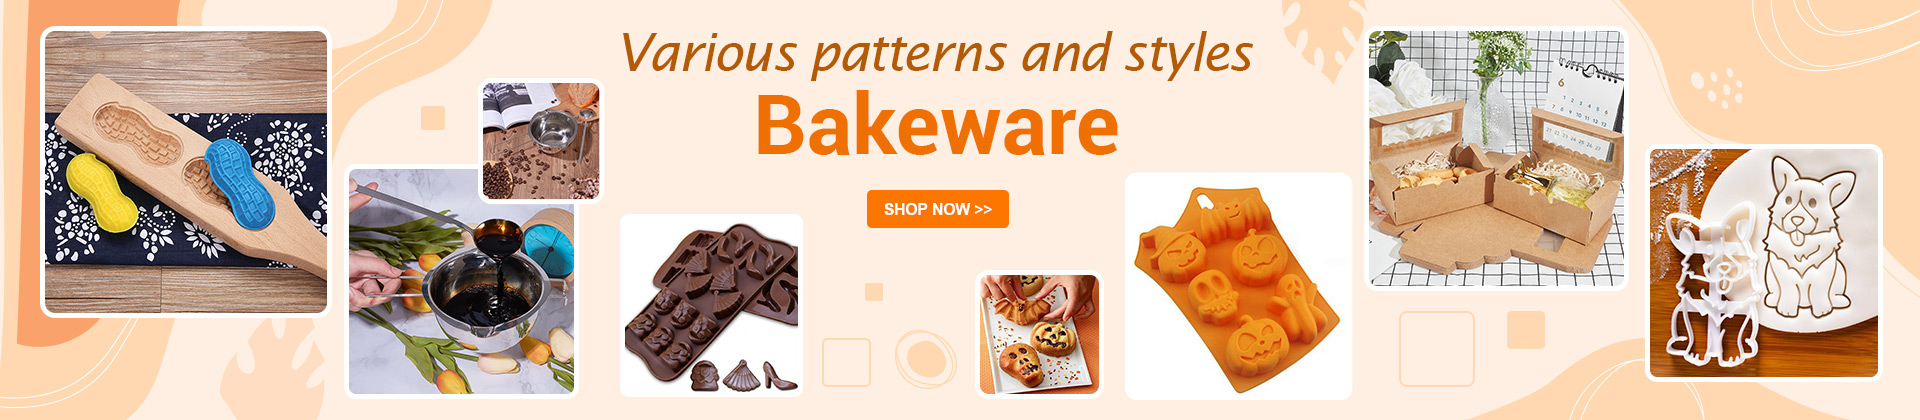 Various patterns and styles Bakeware Shop Now>>